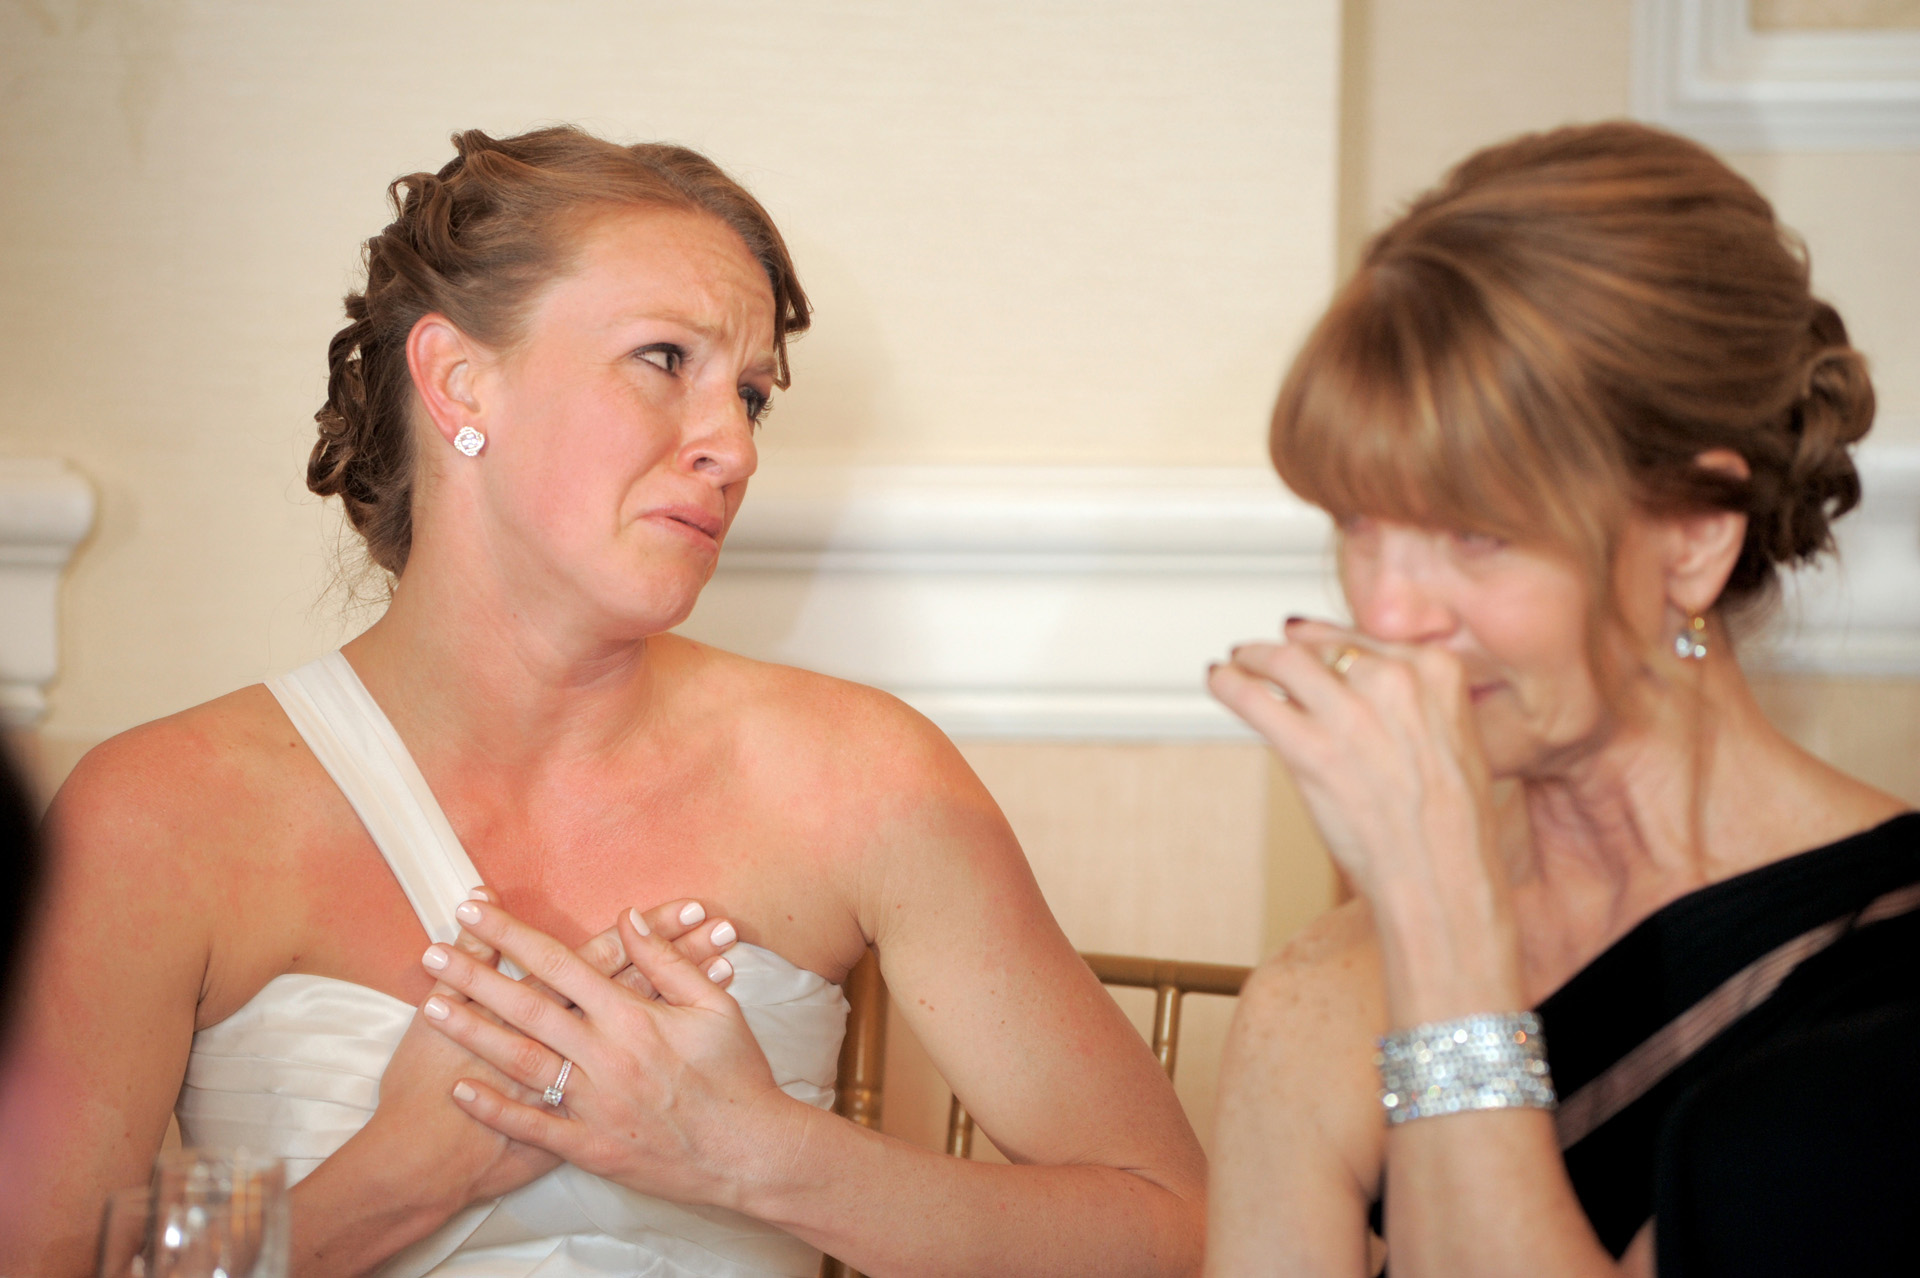 The Historic church Sweetest Heart of Mary and the Dearborn Inn of Detroit's historic church in Detroit and Dearborn, Michigan wedding photographer's photo of the bride and her mother starting to cry during the toasts at the wedding at the wedding reception at the Dearborn Inn in Dearborn, Michigan..